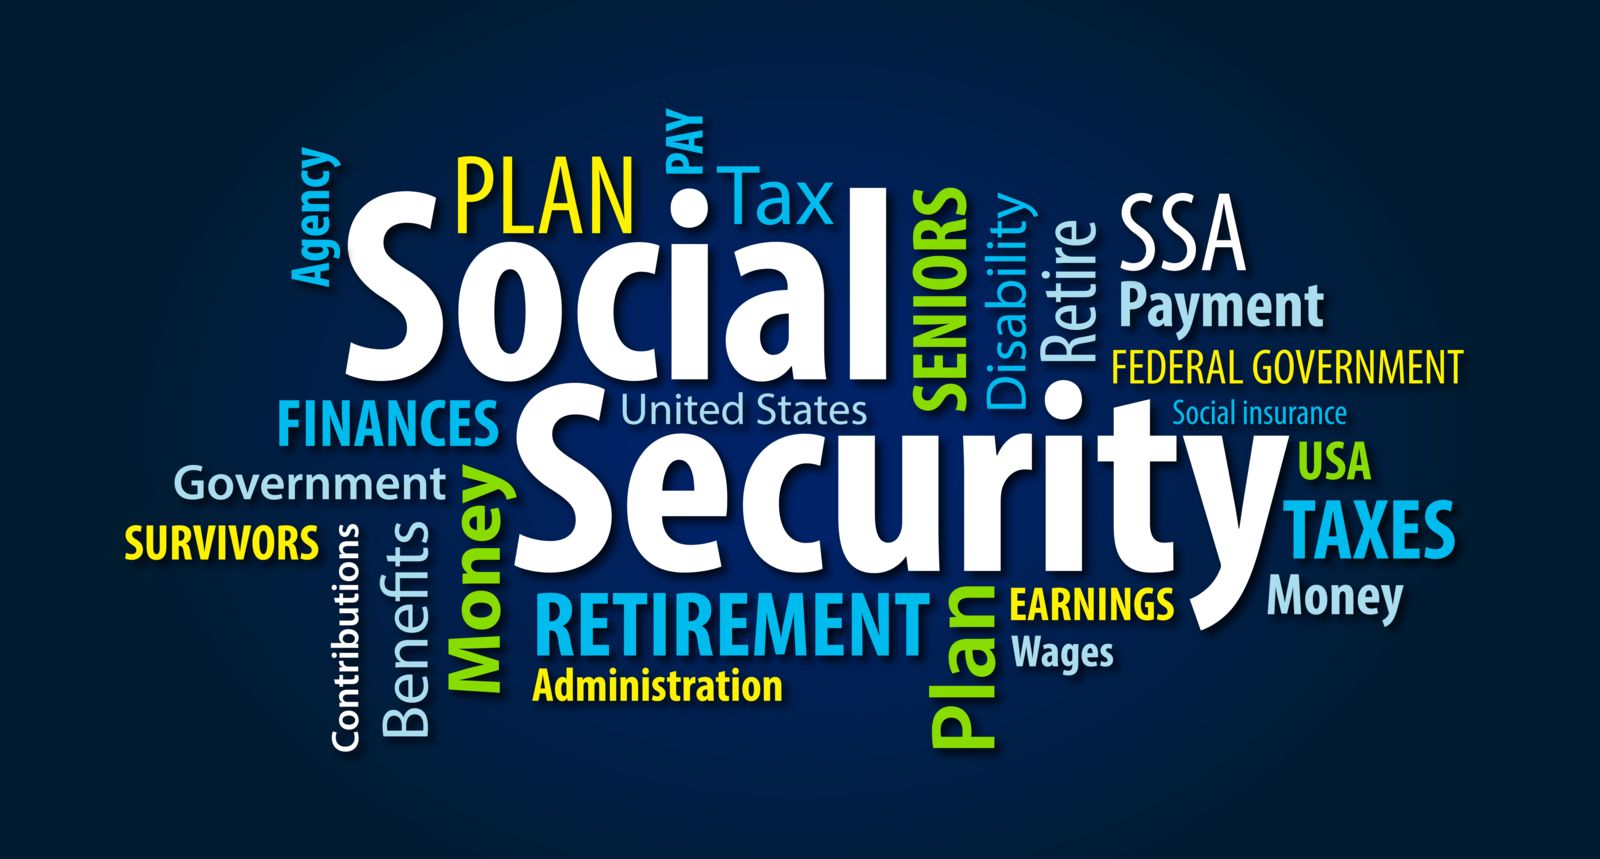 When Should I Take My Social Security Benefits?